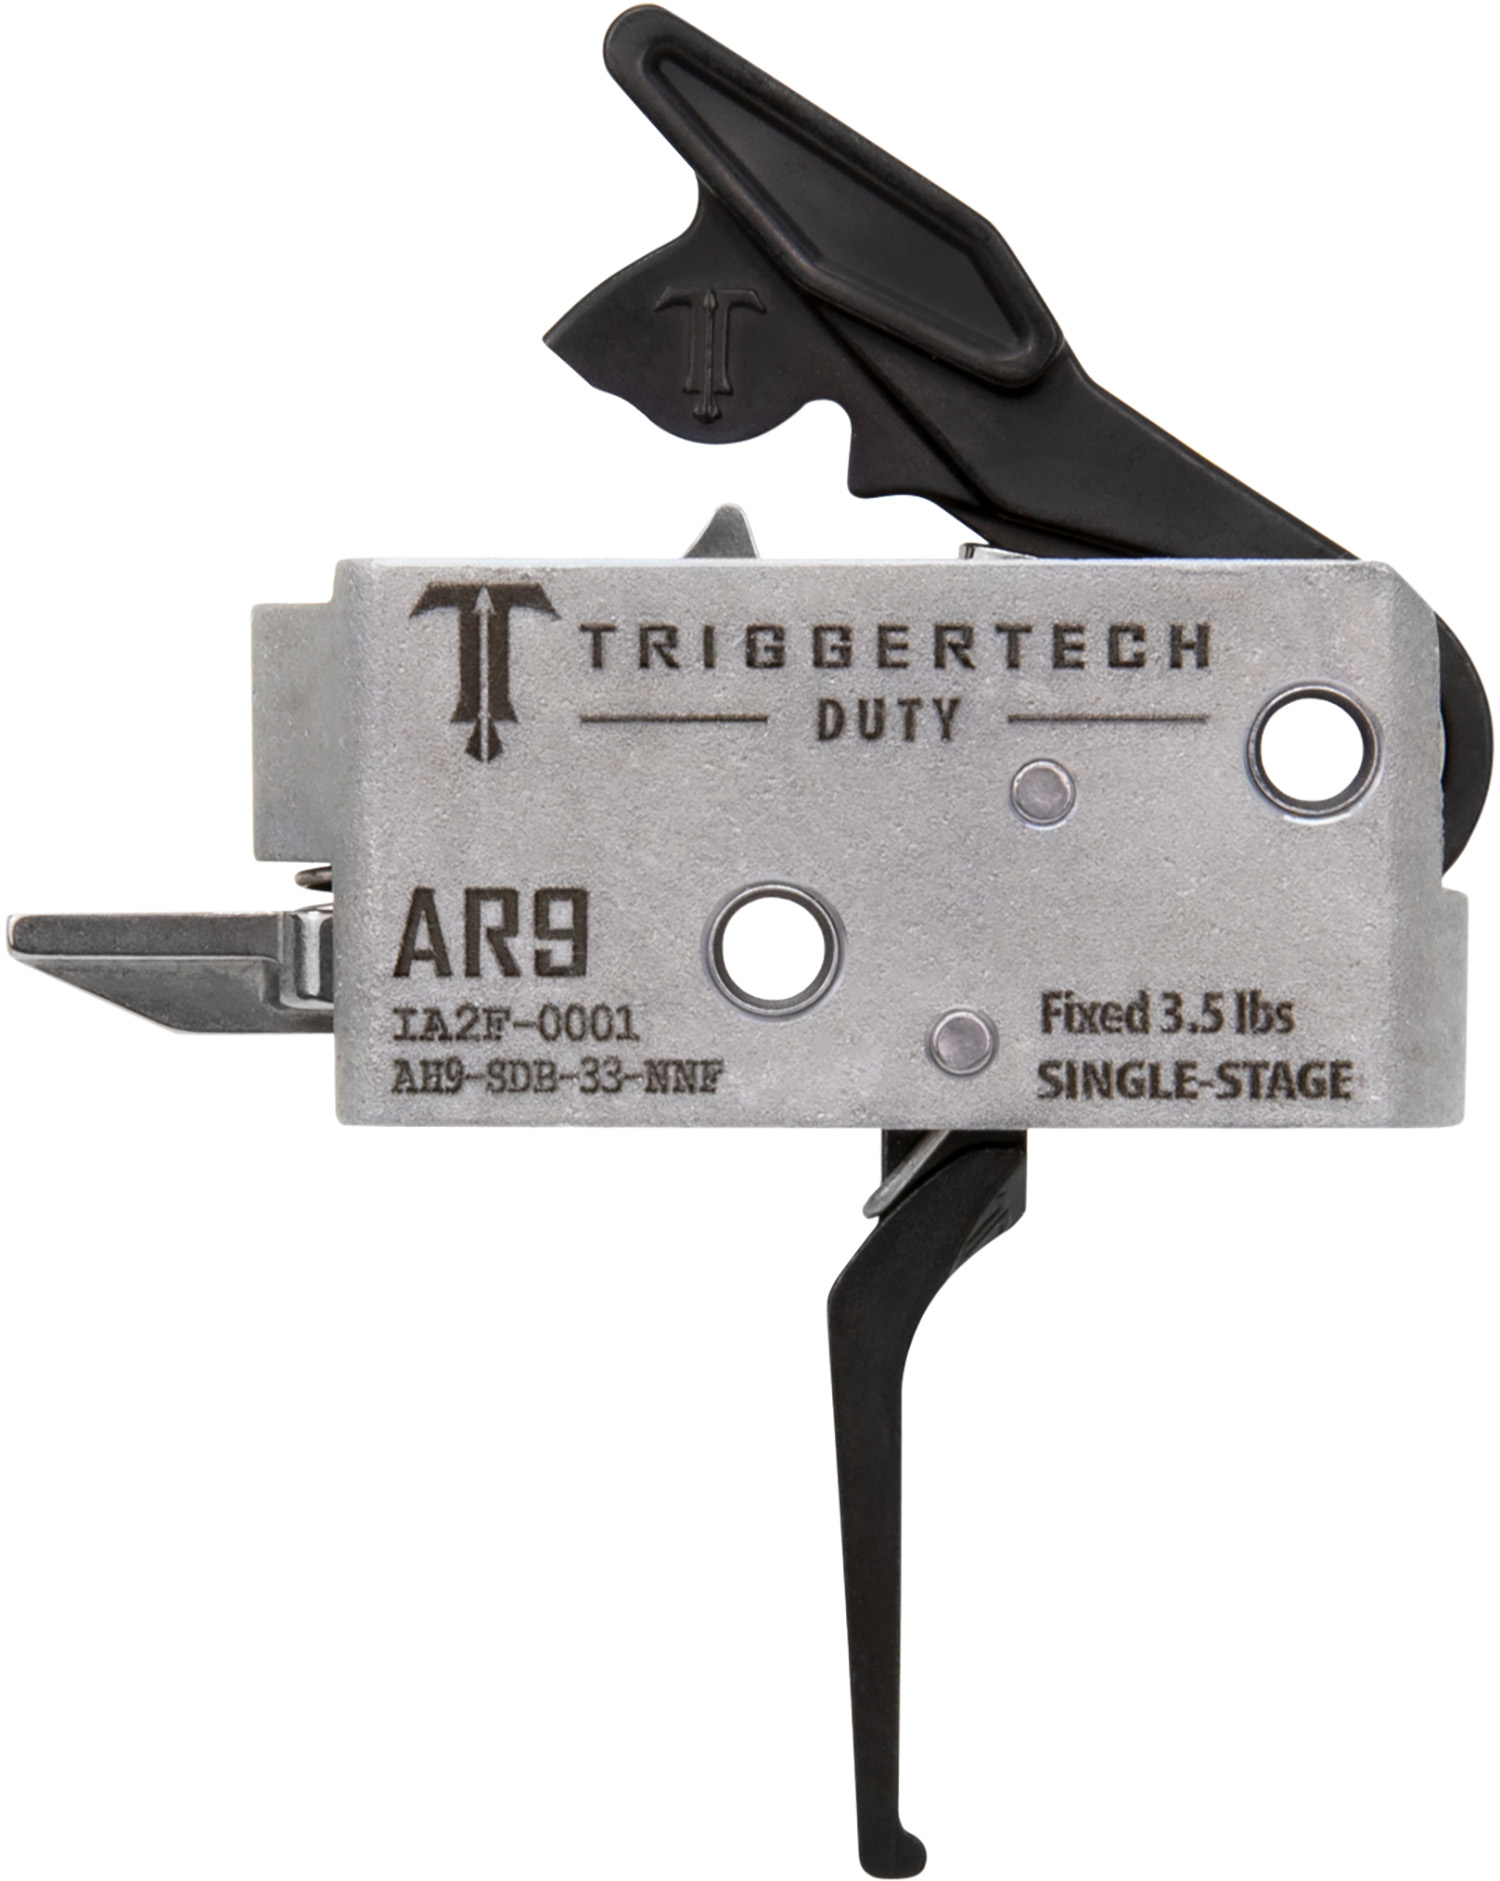 TriggerTech Ah9SDB33NNF Duty Flat Single-Stage 3.50 Lbs Draw Weight Fits AR-9